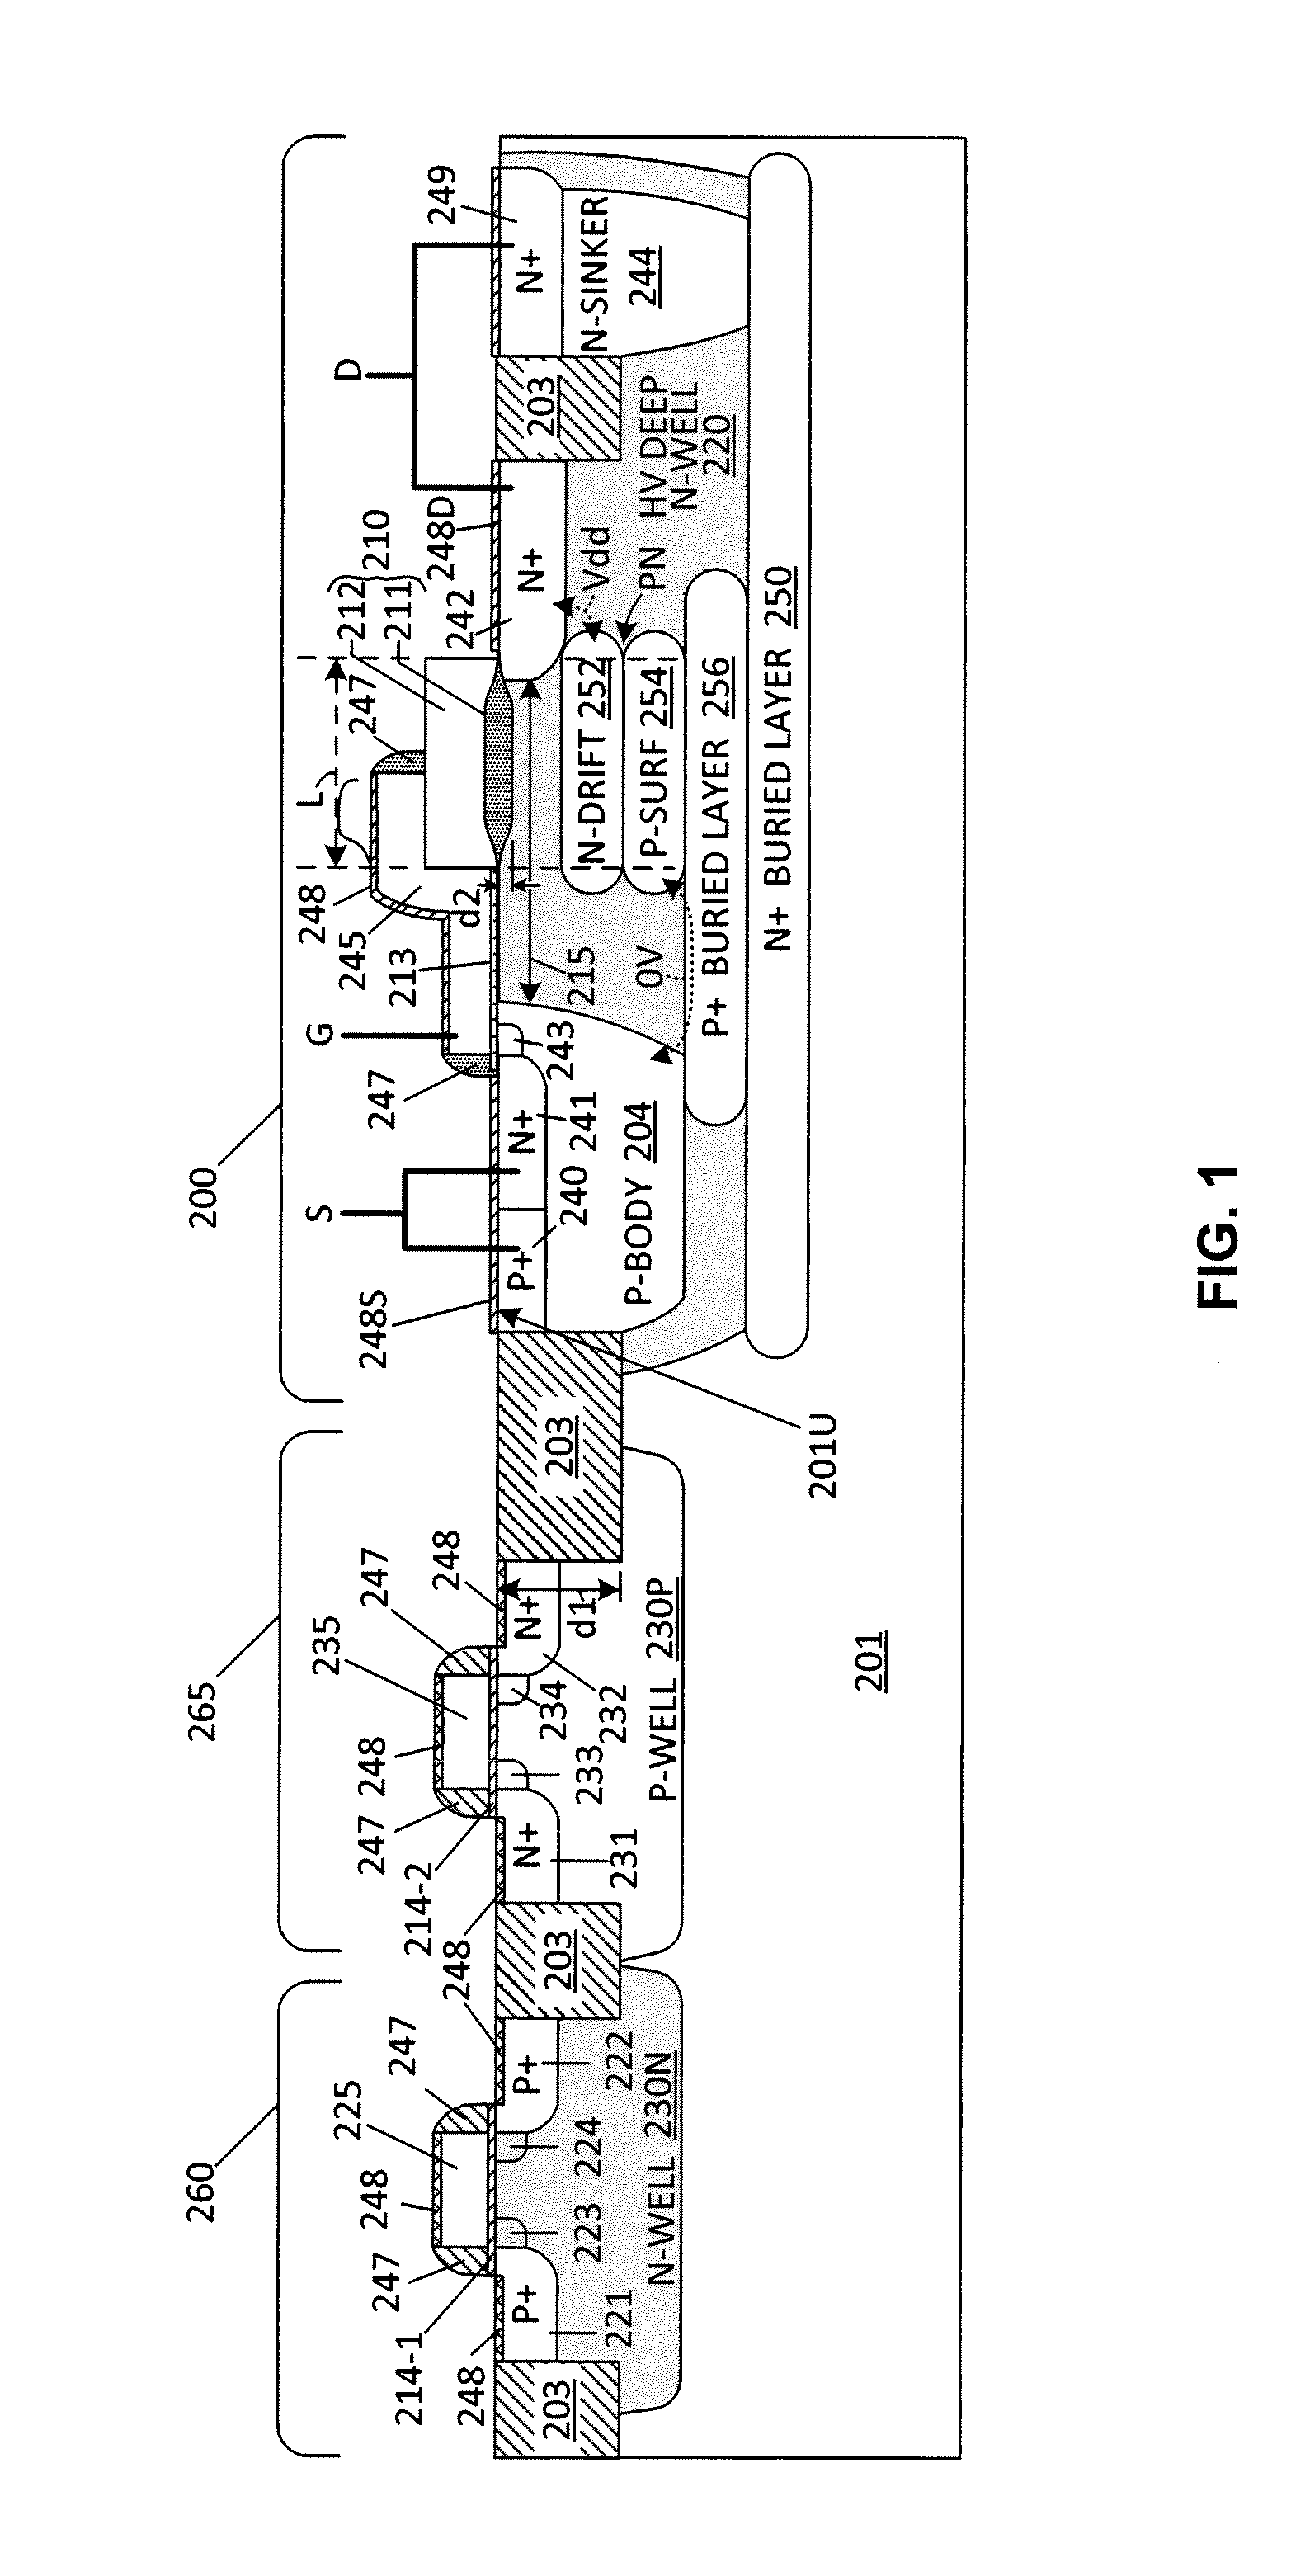 Double-Resurf LDMOS With Drift And PSURF Implants Self-Aligned To A Stacked Gate "BUMP" Structure